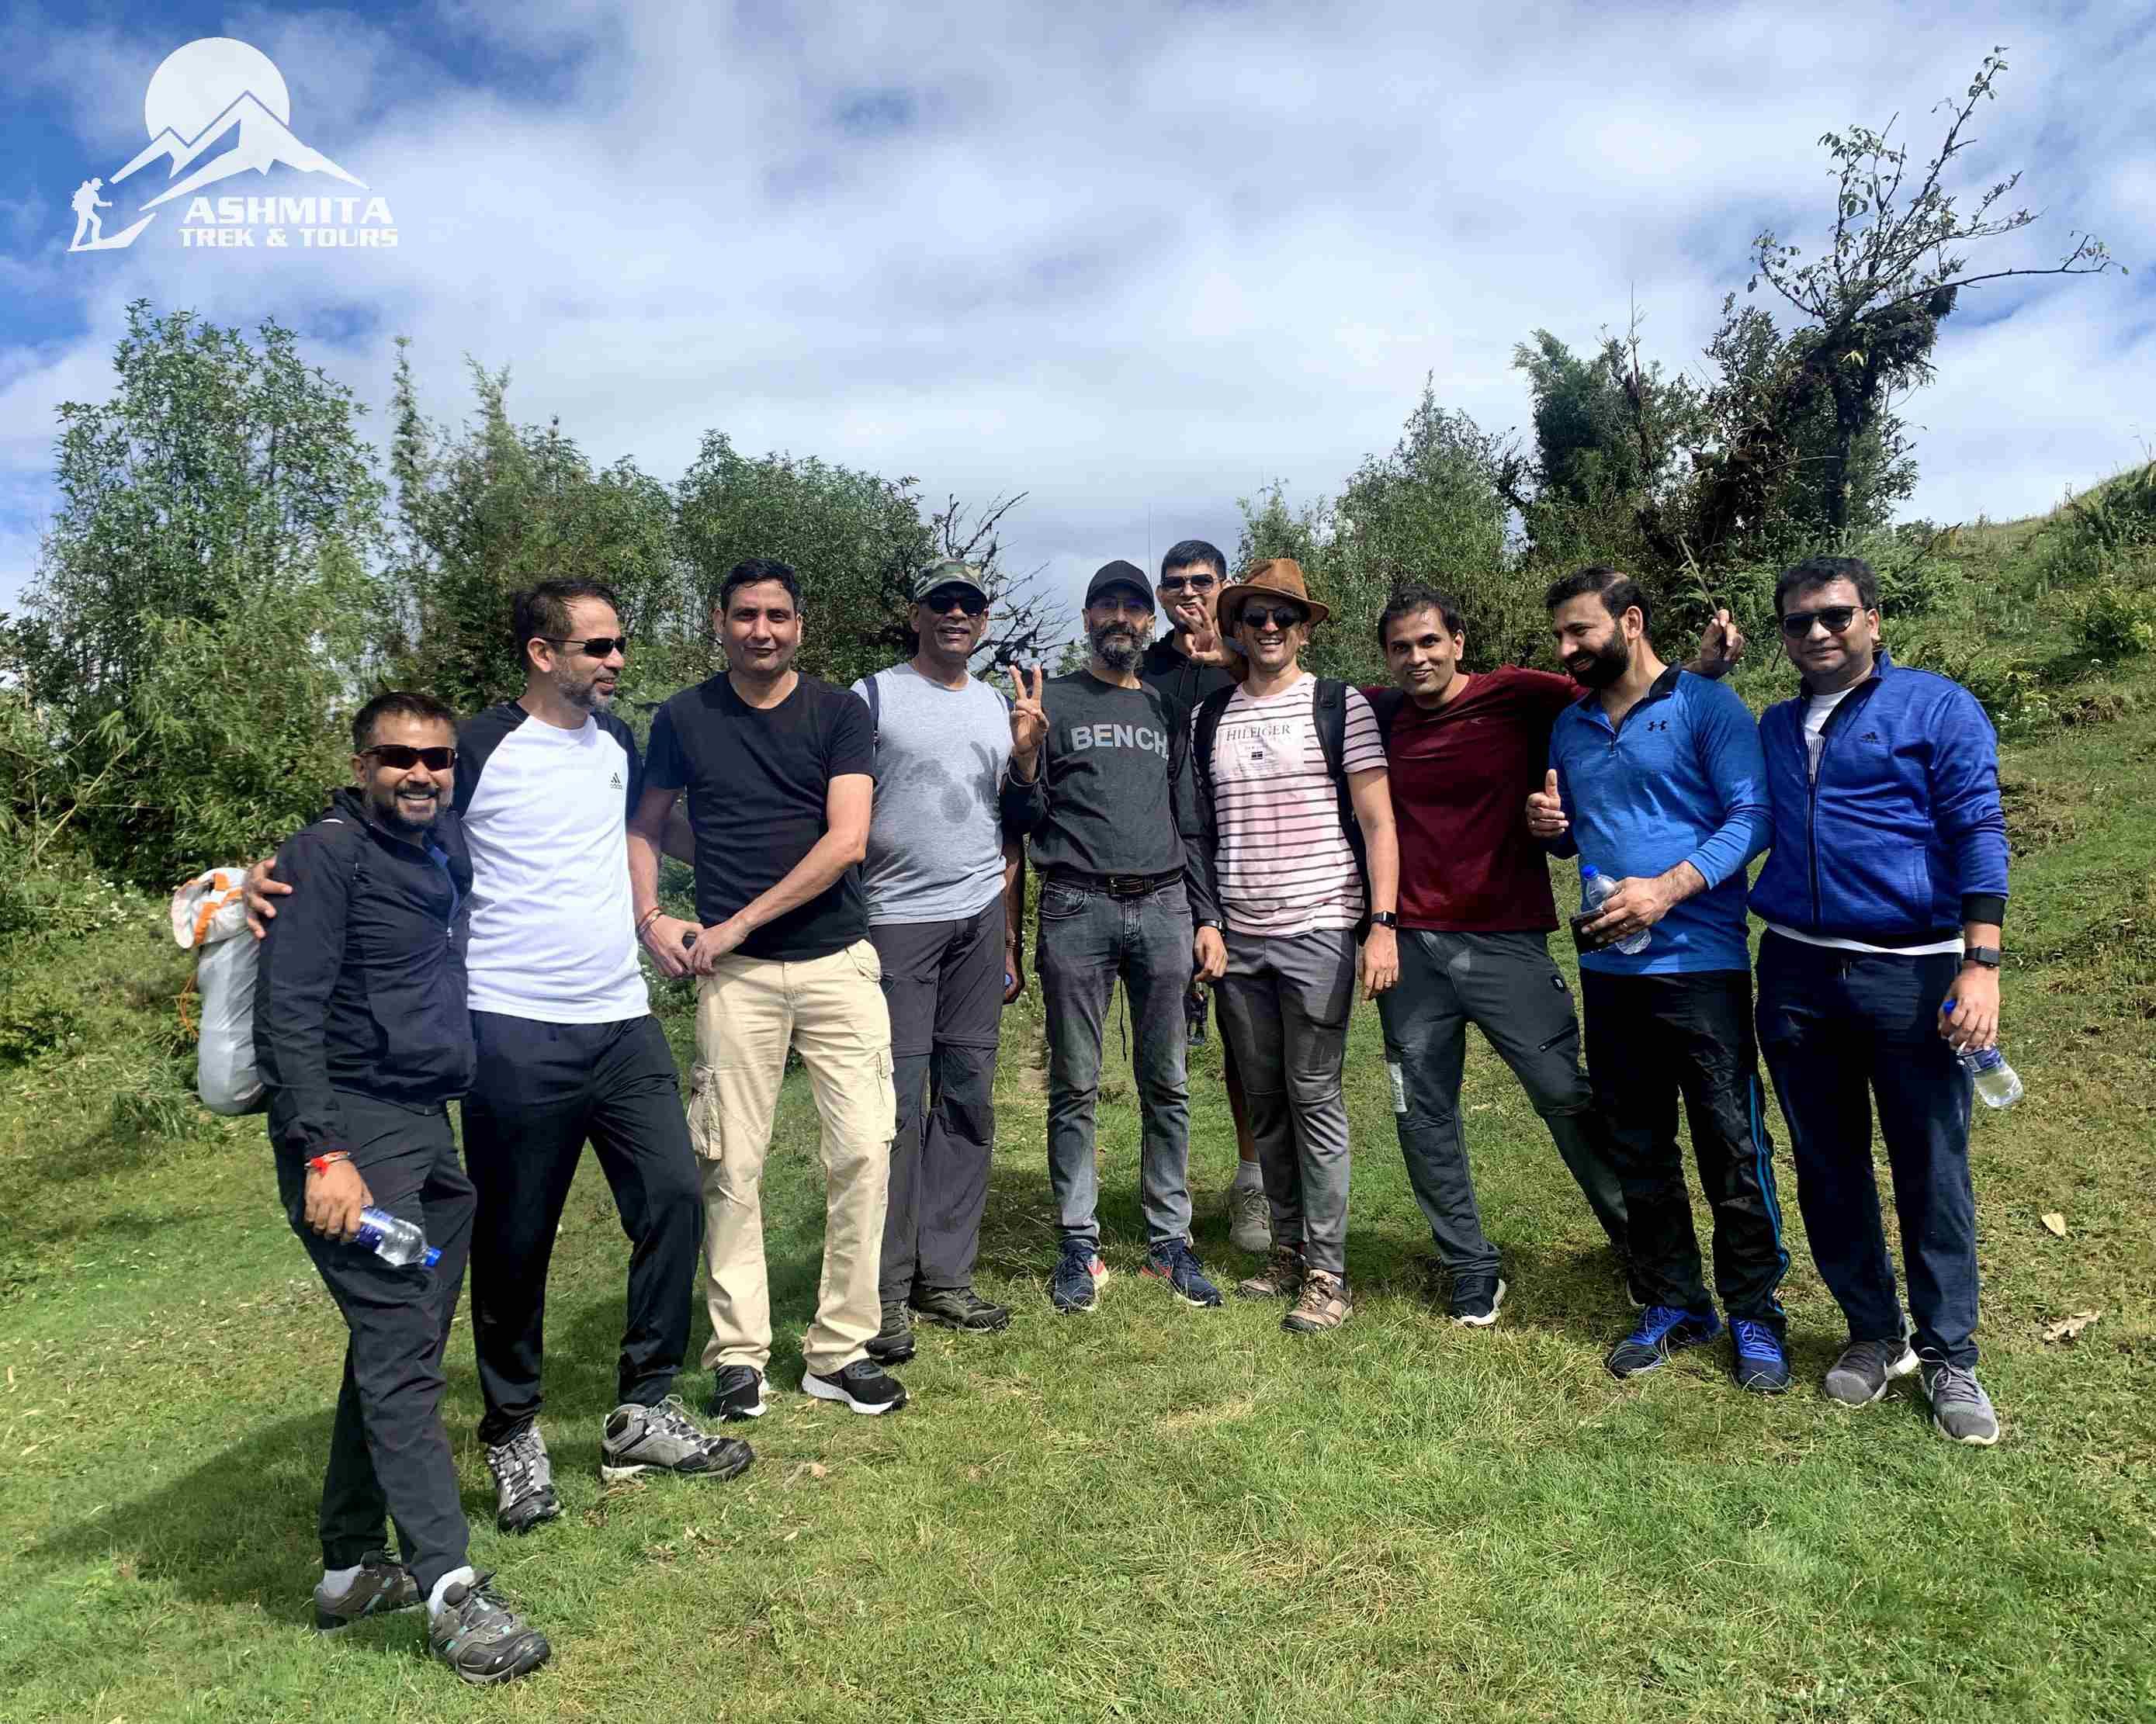 Group photo after complete the Trek